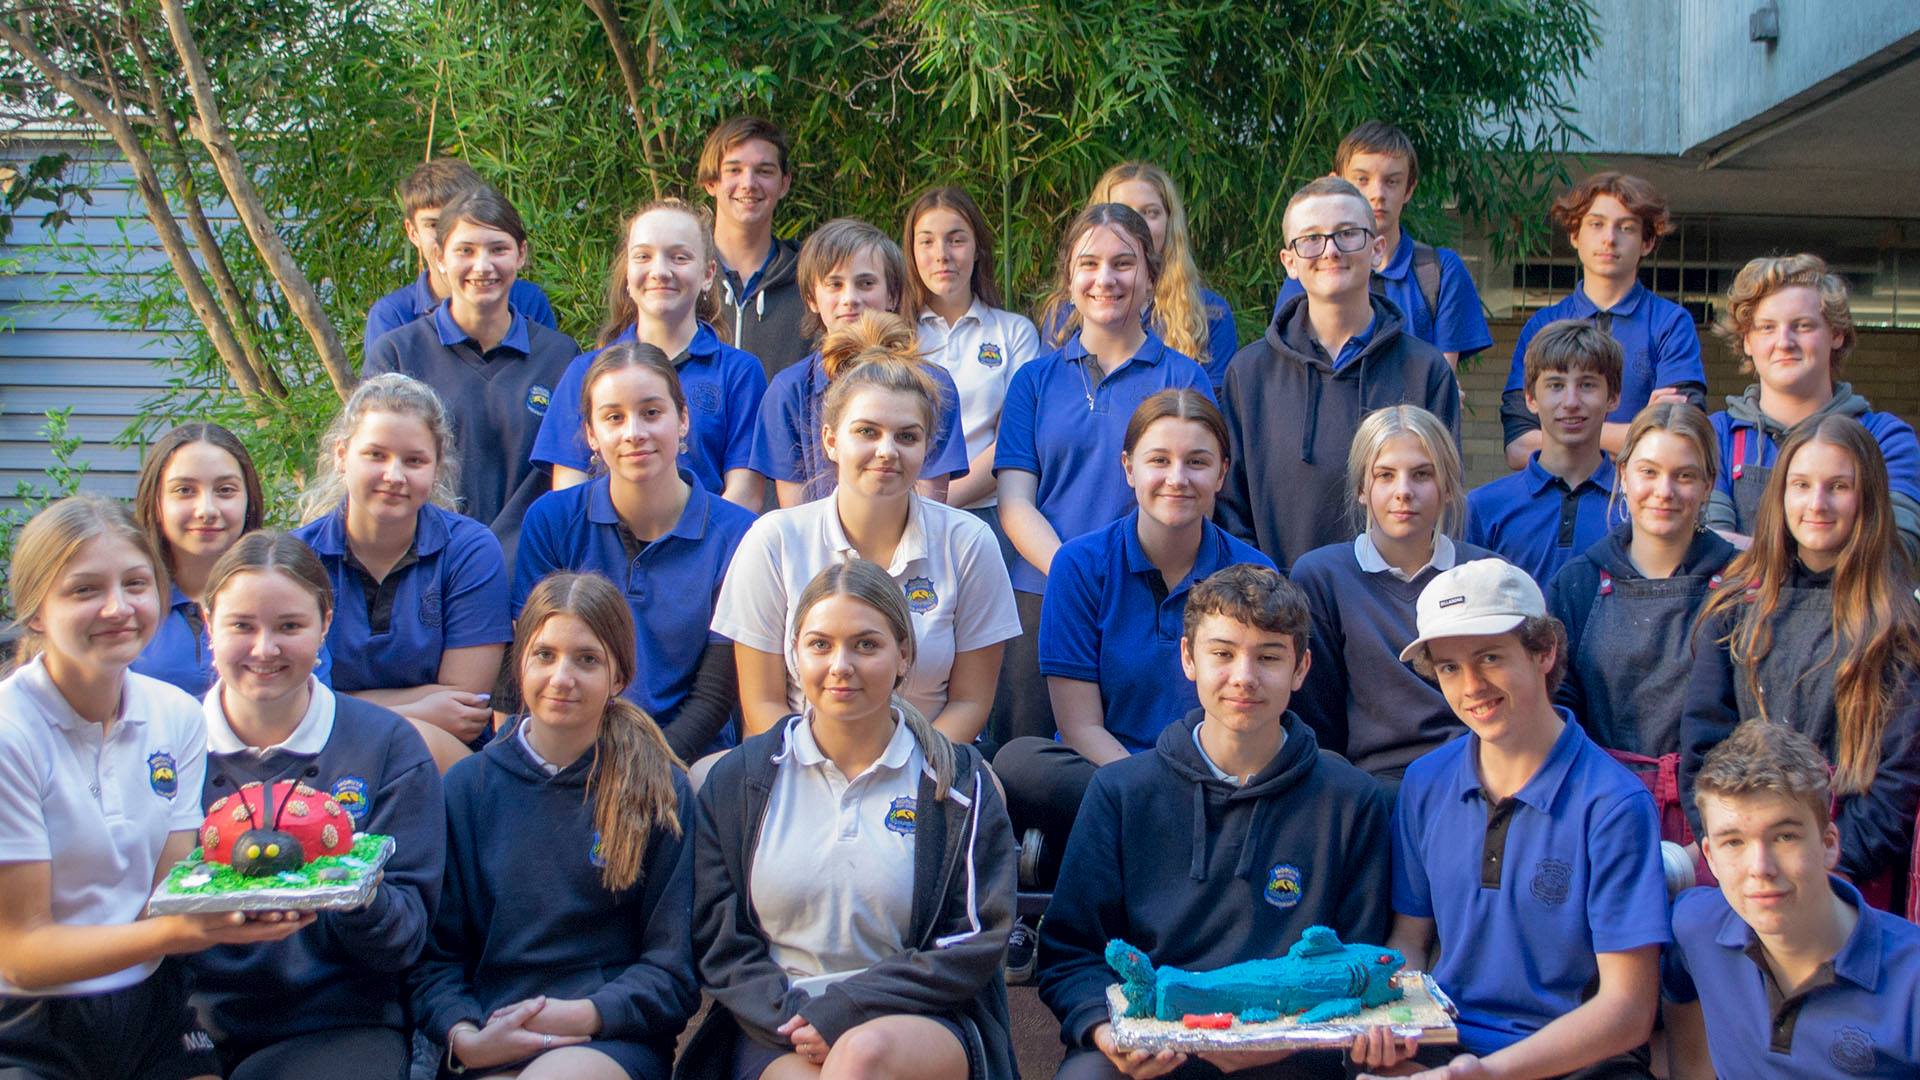 Moruya High School takes the cake with Youngcare fundraiser